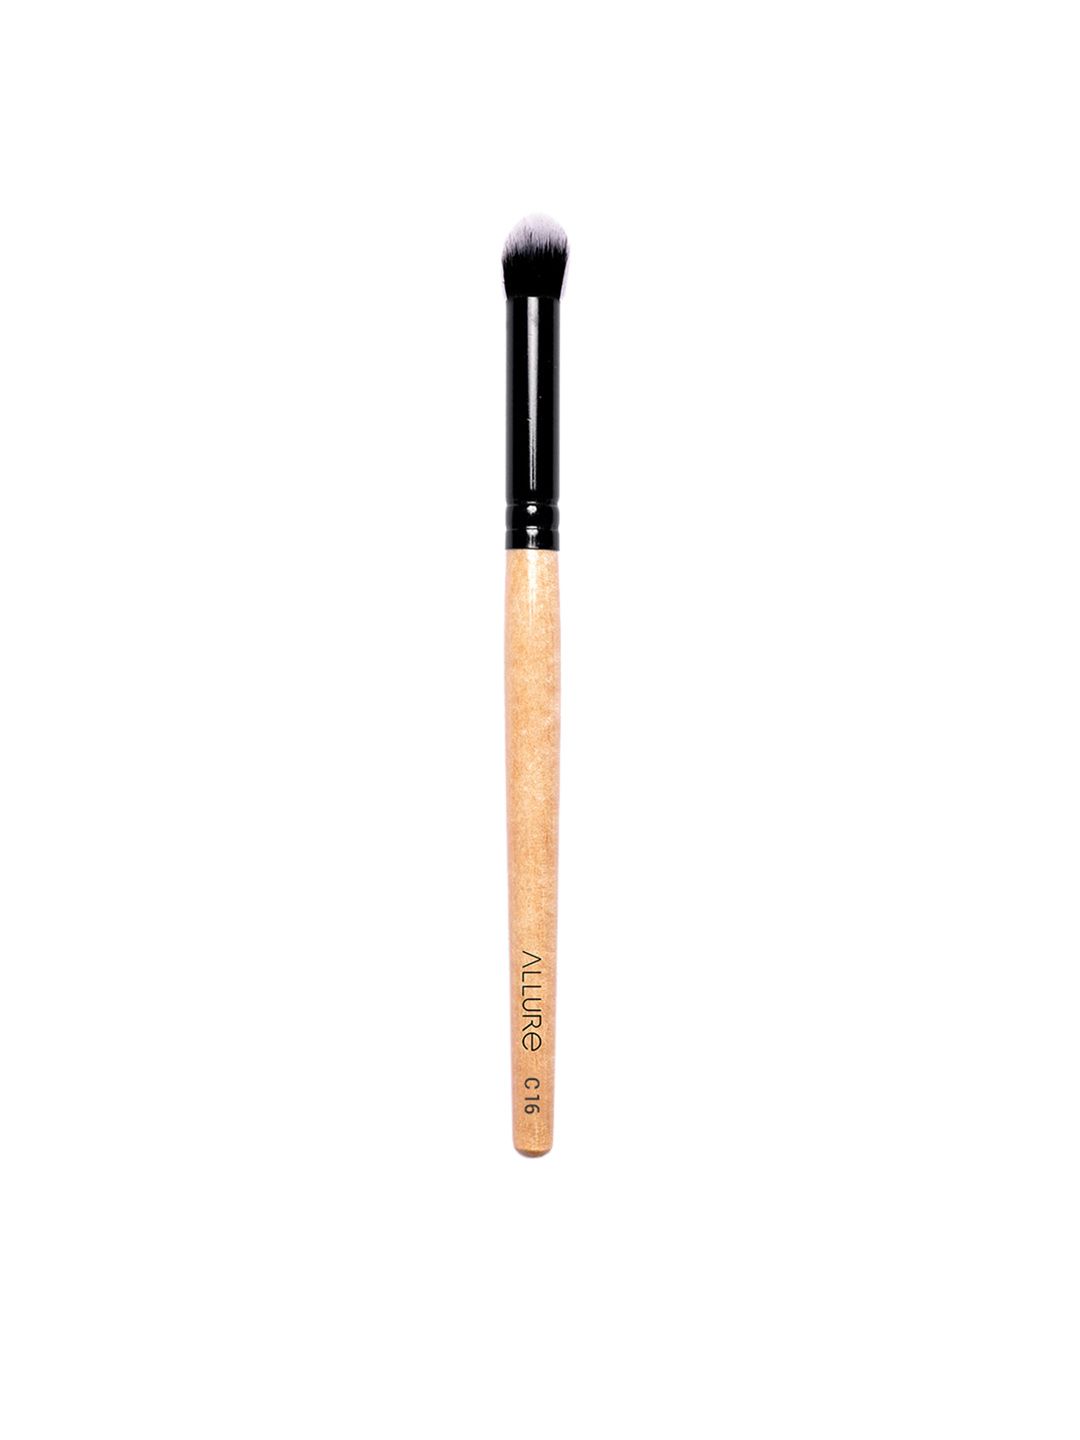 ALLURE Wooden Large Eye Brush C-16 Price in India